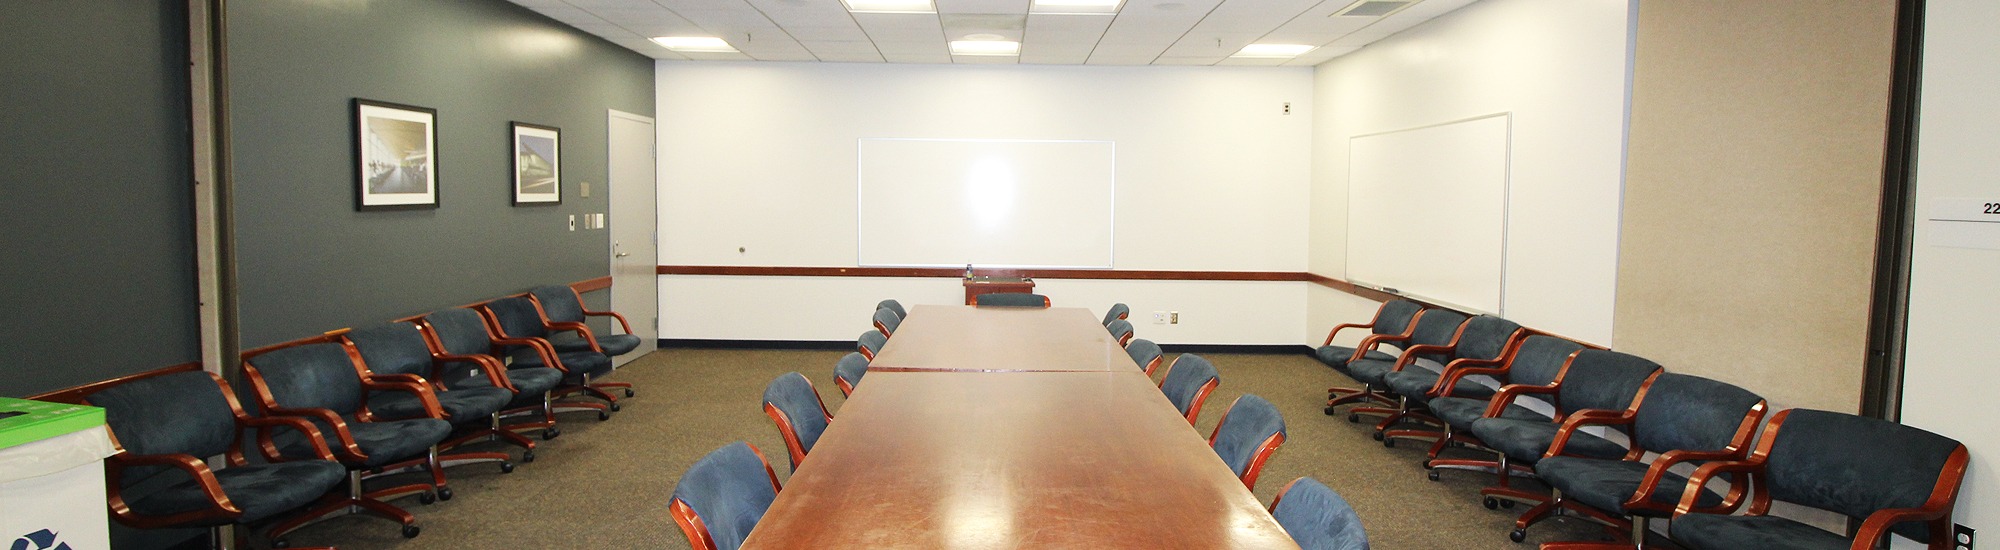 Conference room with a long table with chairs, and additional chairs against the walls